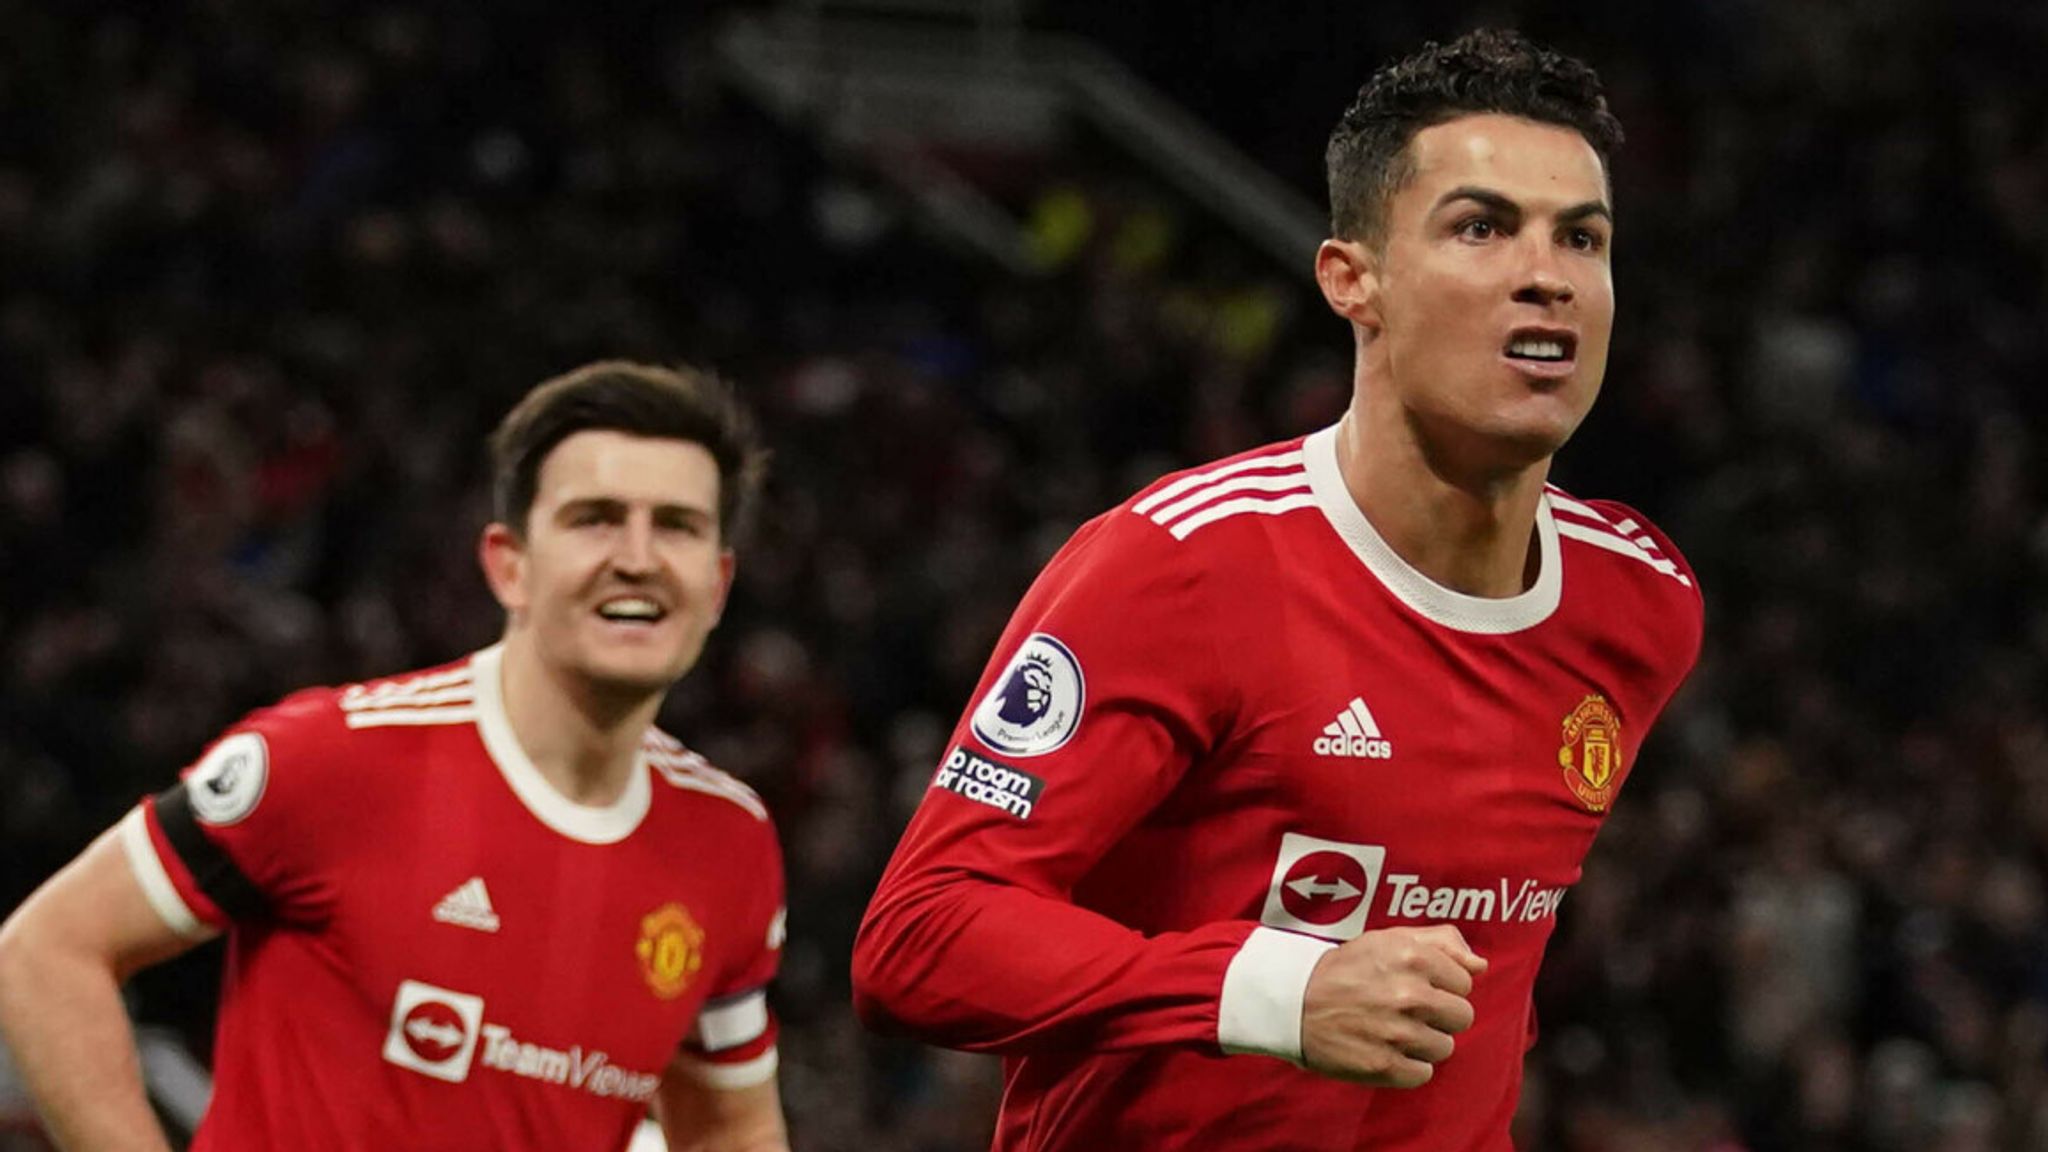 Without Ronaldo, No Player At Man United Can Score 24 Goals –Ferdinand